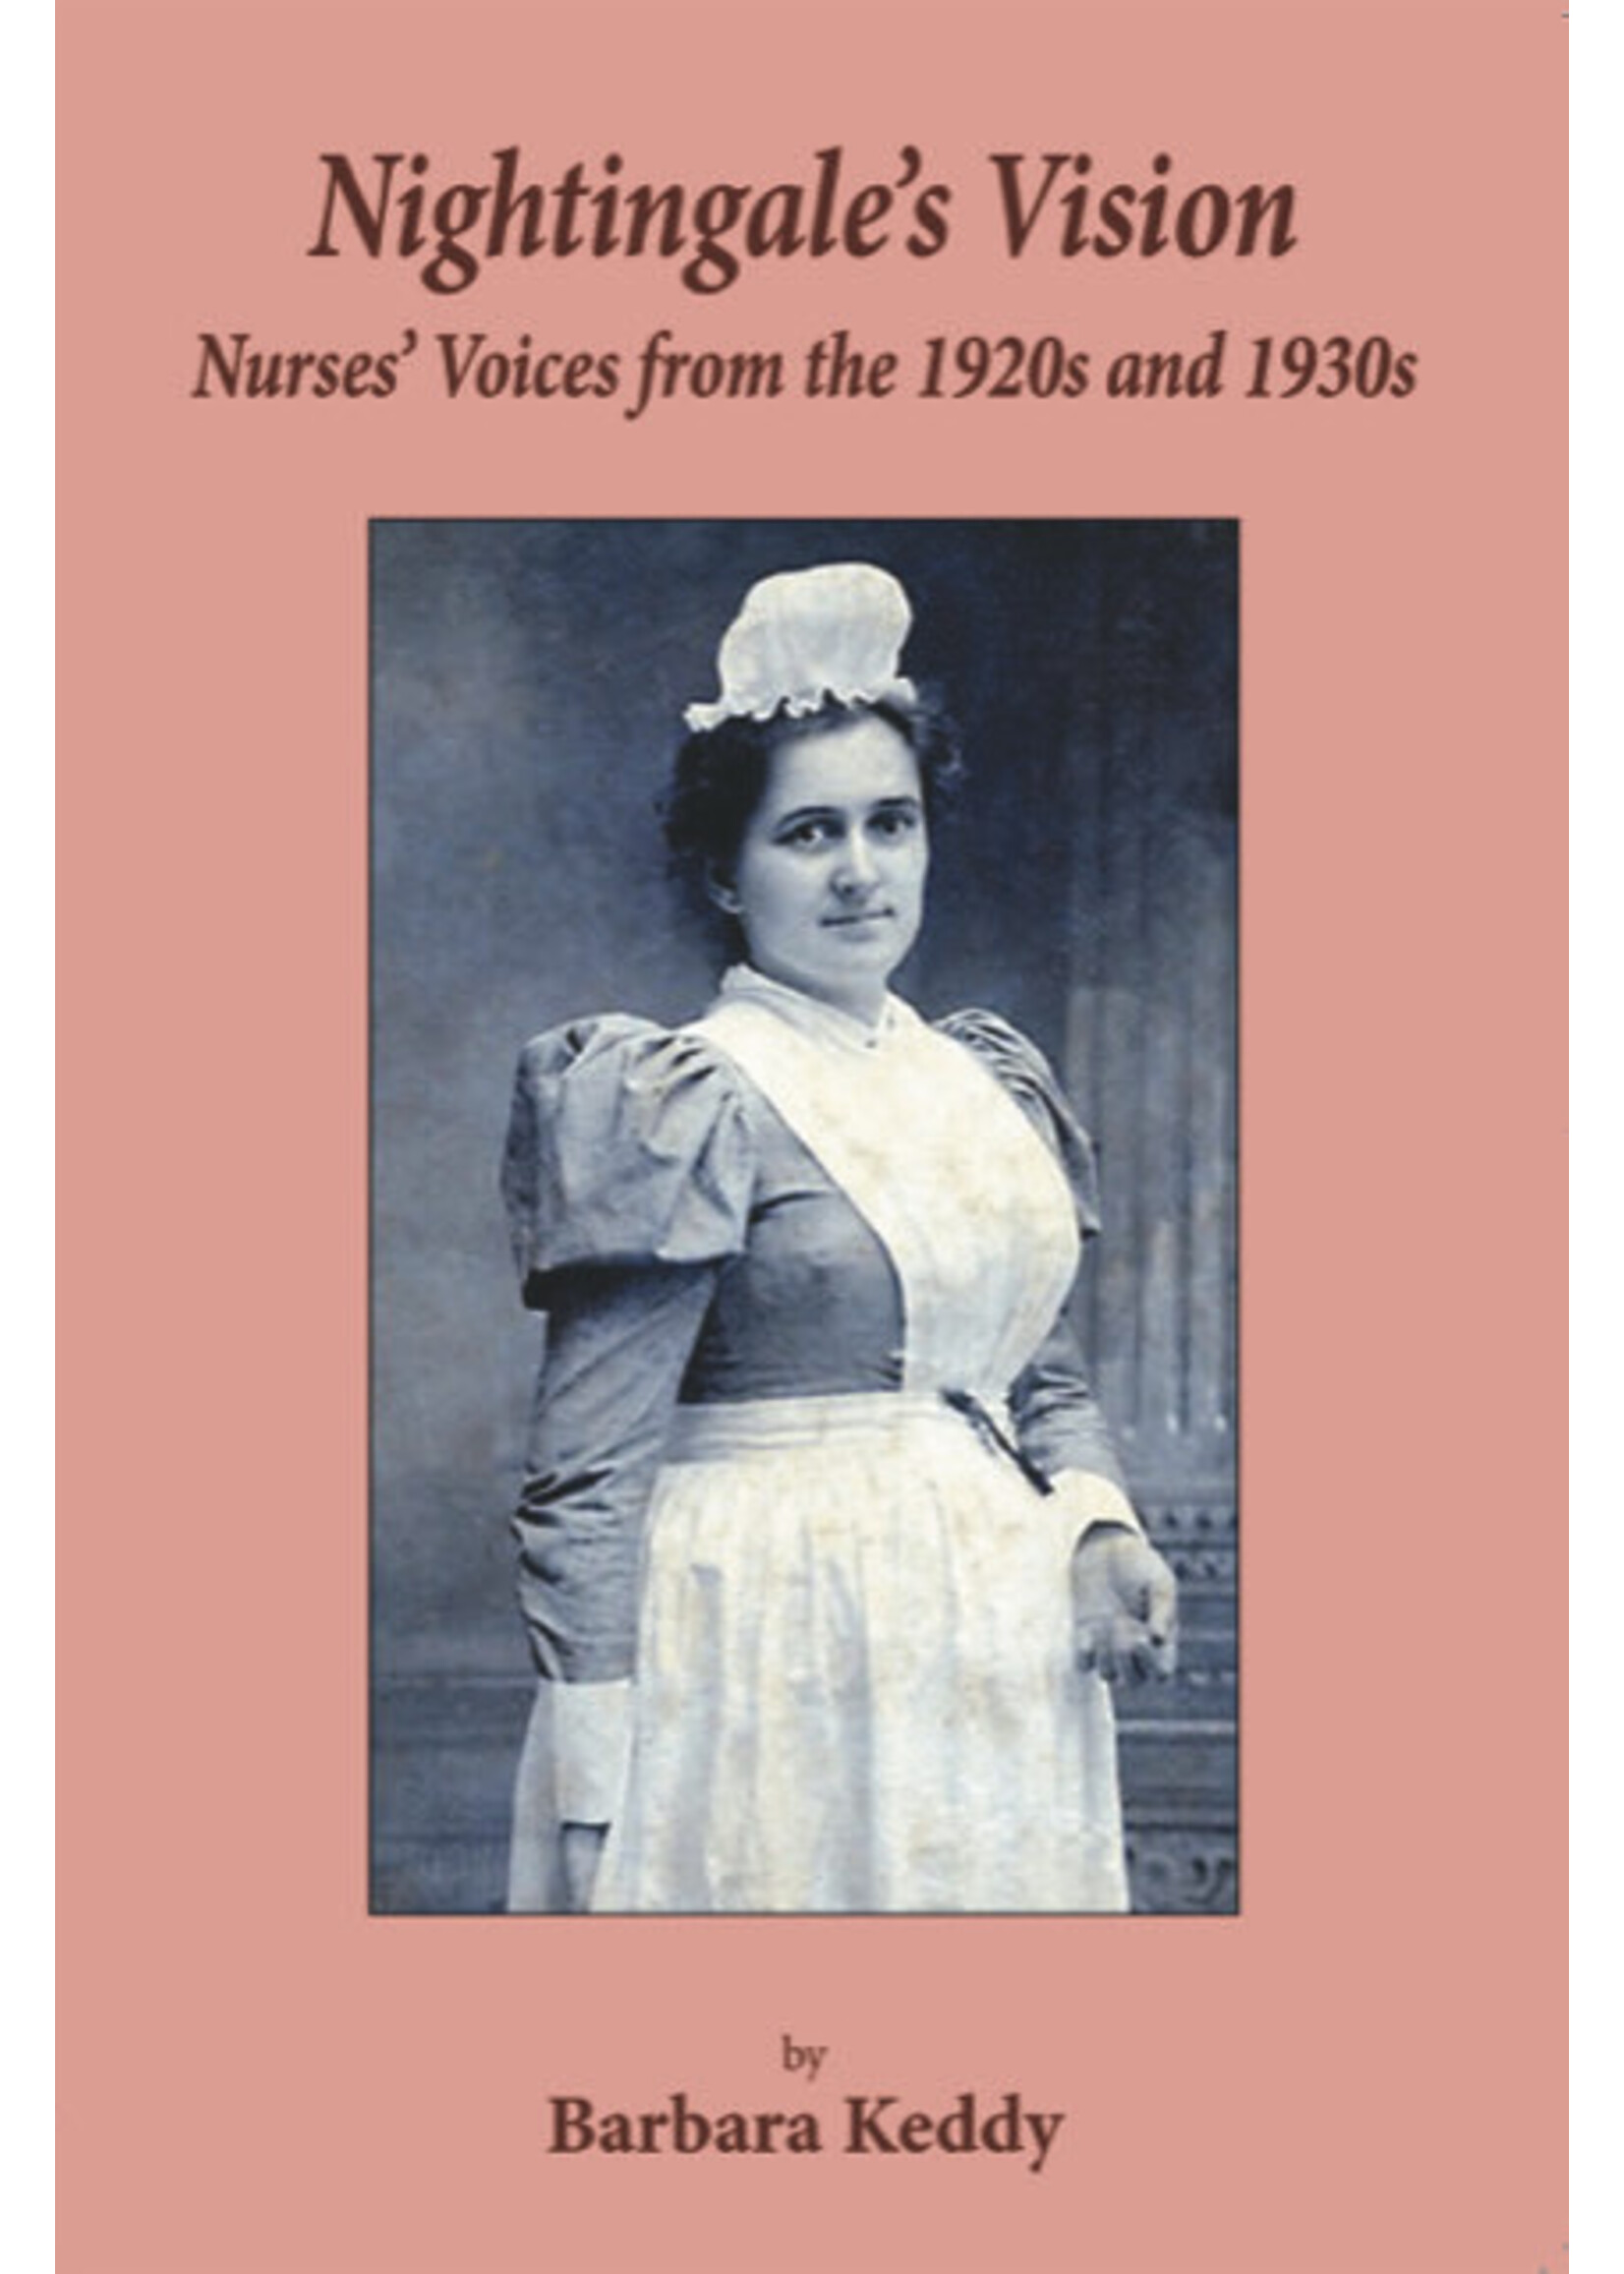 Nightingale’s Vision: Nurse’s Voices from the 1920s and 1930s by Barbara Keddy